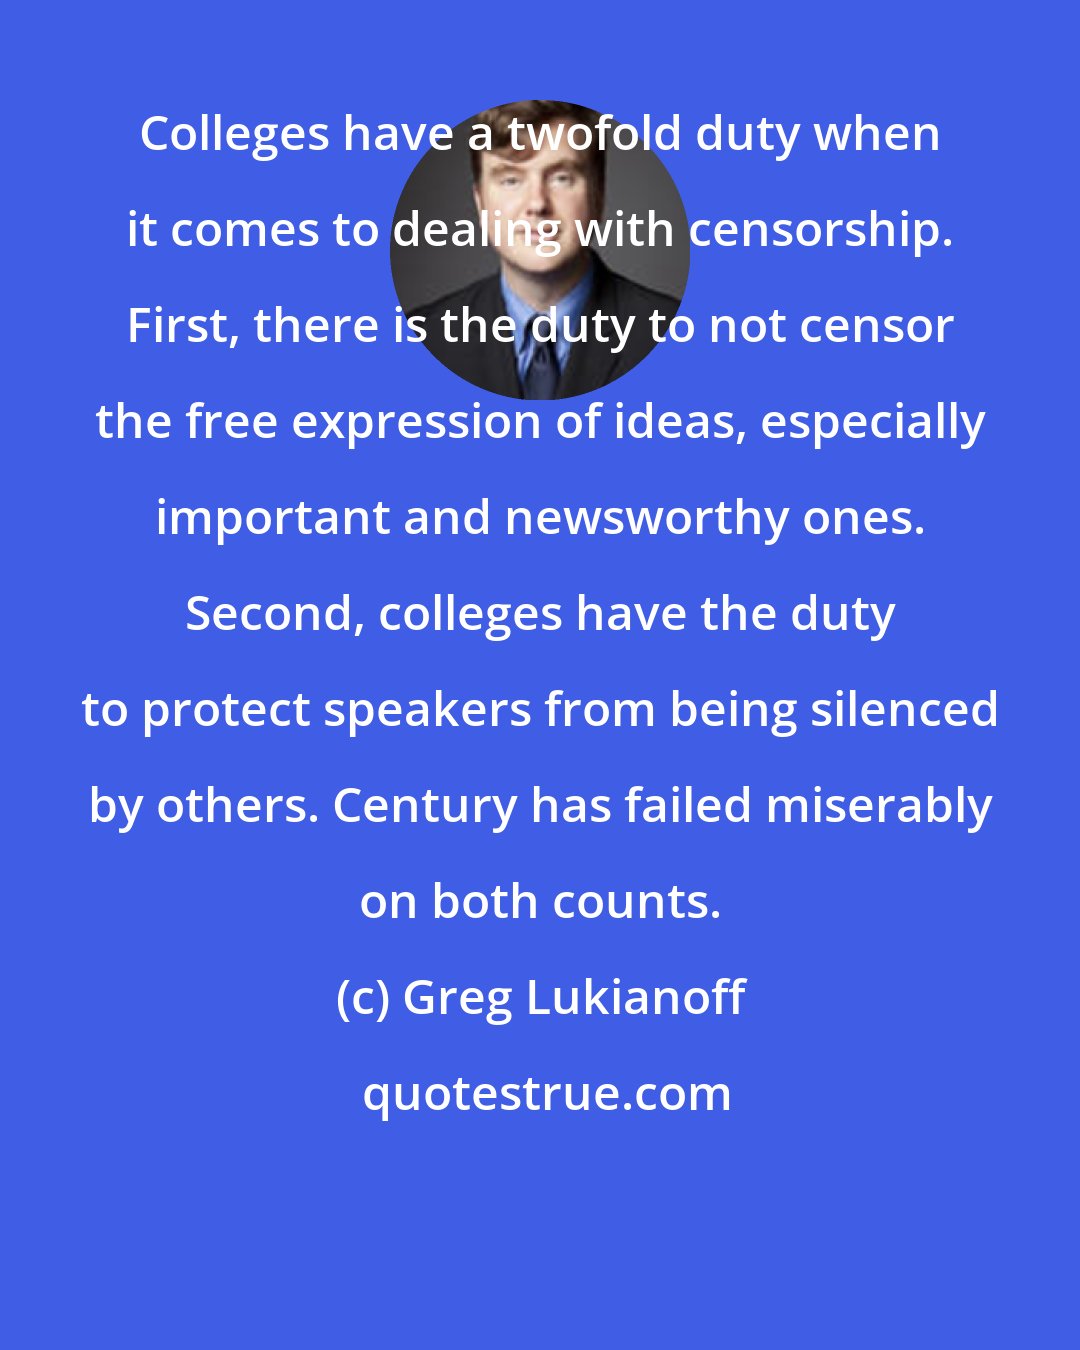 Greg Lukianoff: Colleges have a twofold duty when it comes to dealing with censorship. First, there is the duty to not censor the free expression of ideas, especially important and newsworthy ones. Second, colleges have the duty to protect speakers from being silenced by others. Century has failed miserably on both counts.